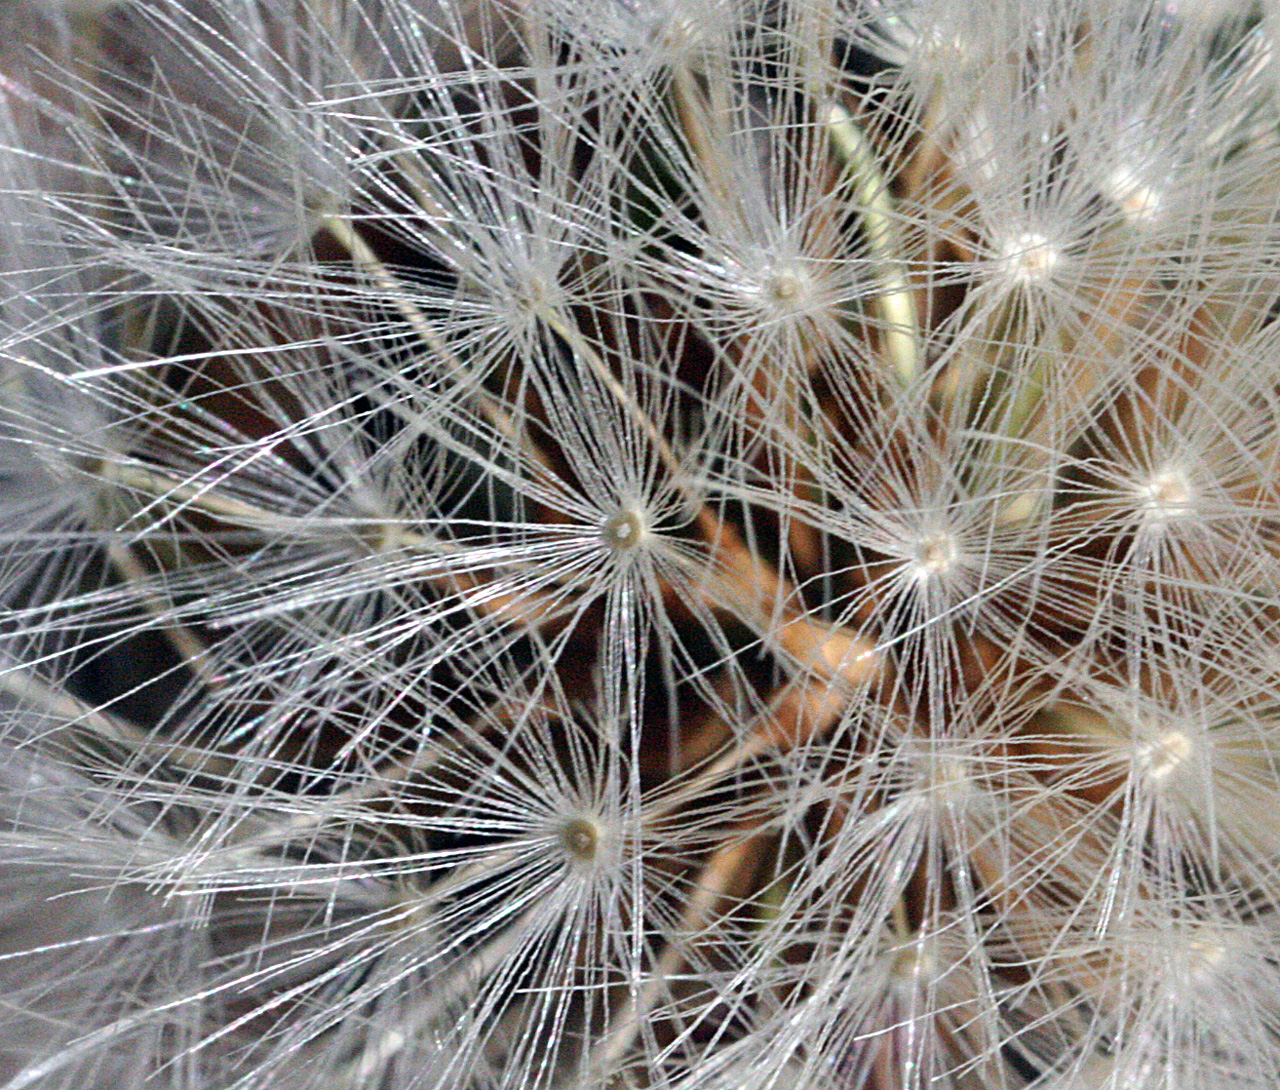 Close view of the seeds, showing the white hairs that help the seed disperse on wind